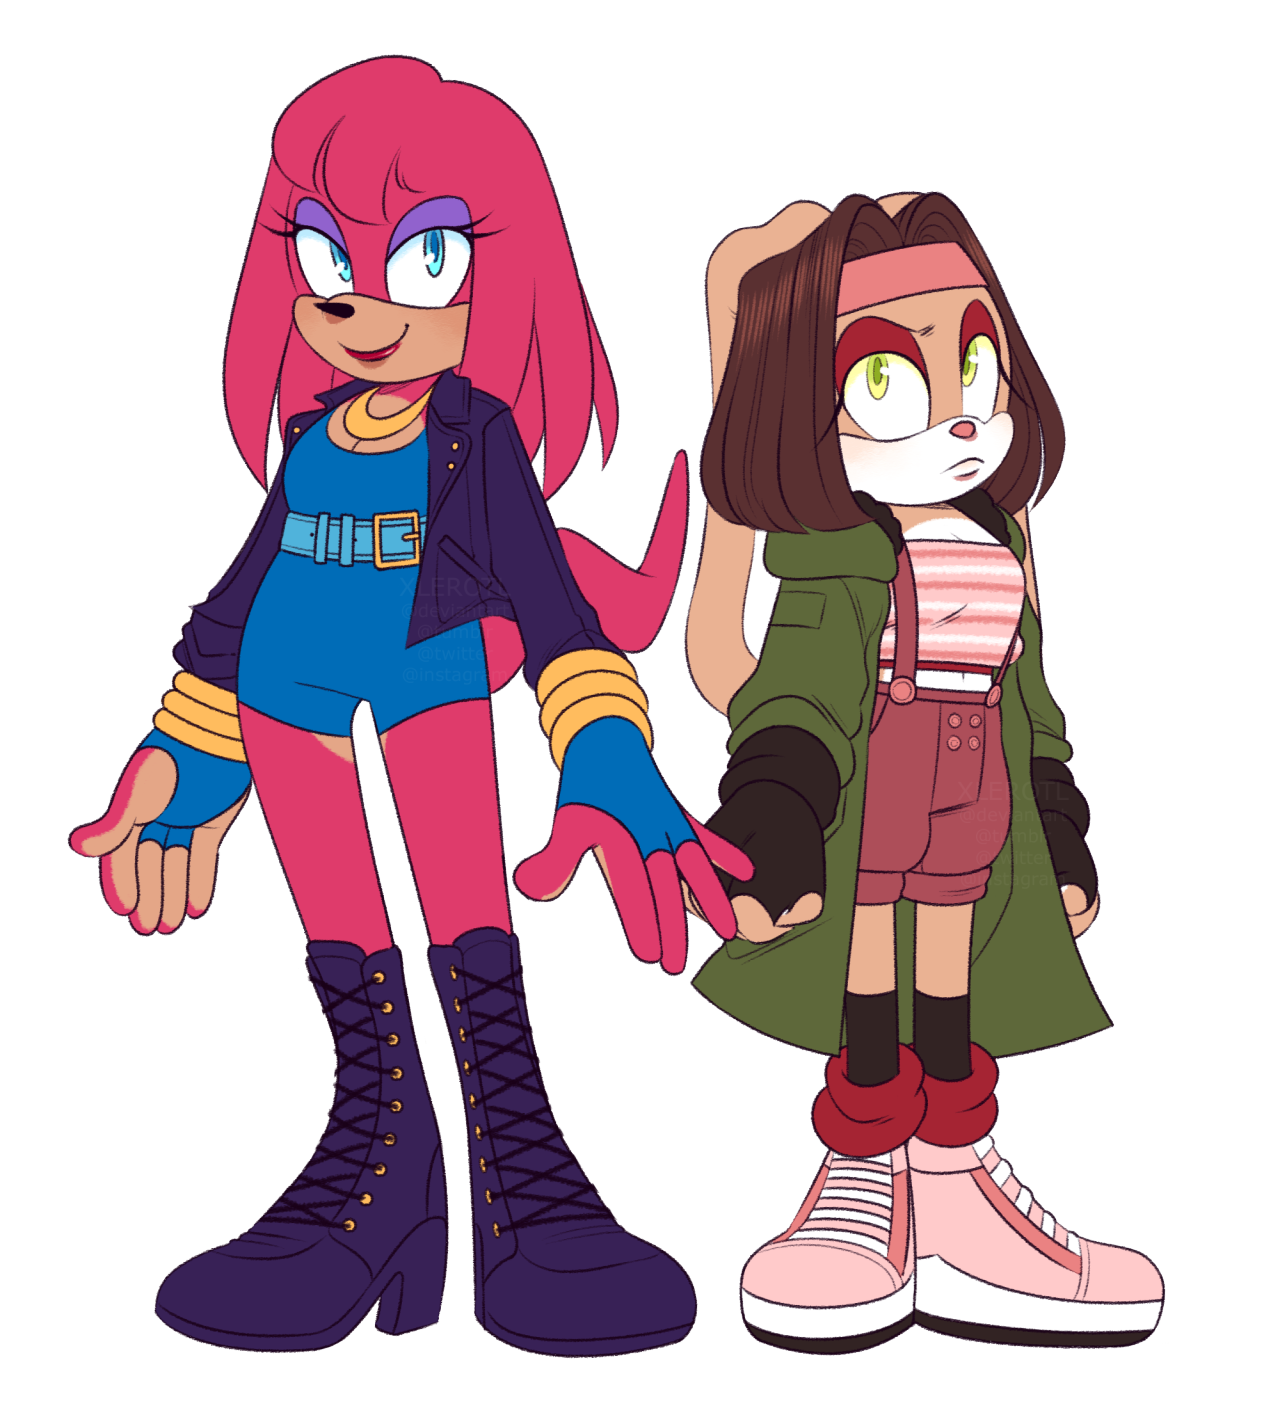 maris-the-echidna-and-macey-the-rabbit-spruced-up-some-2010-sonic-ocs